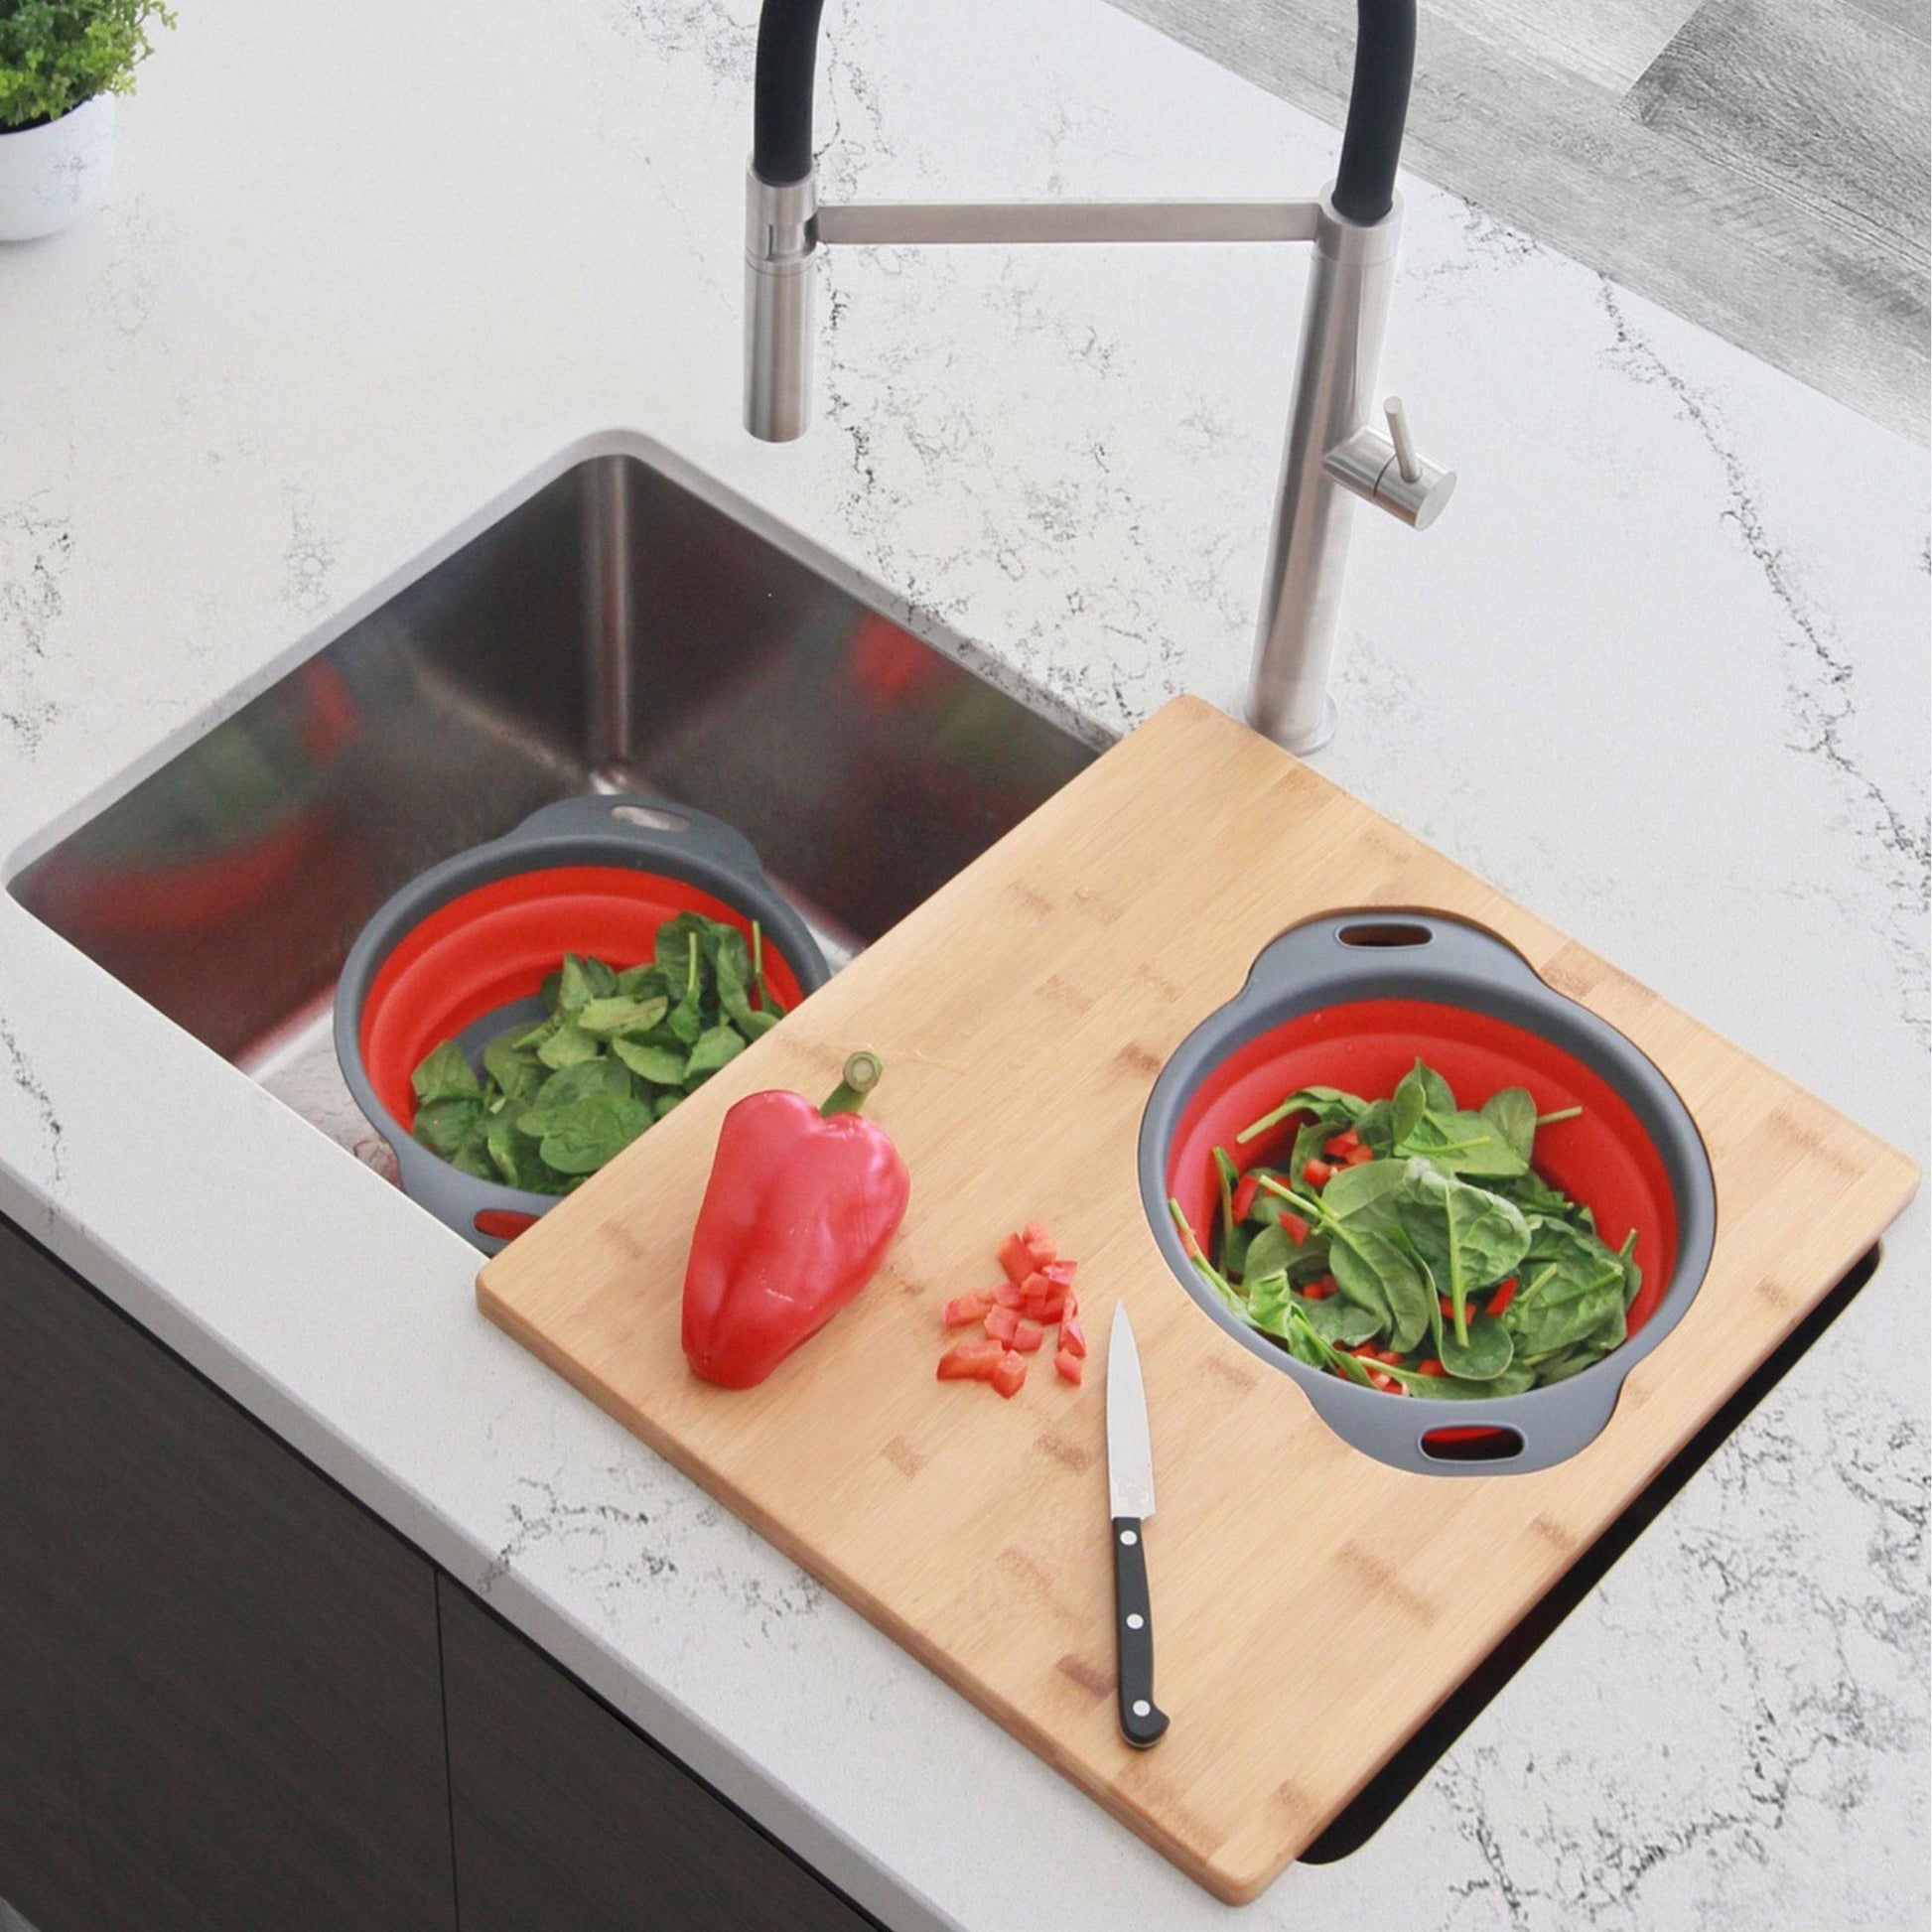 Stylish 16" Over The Sink Large Cutting Board With Colander Set A-907 - Renoz